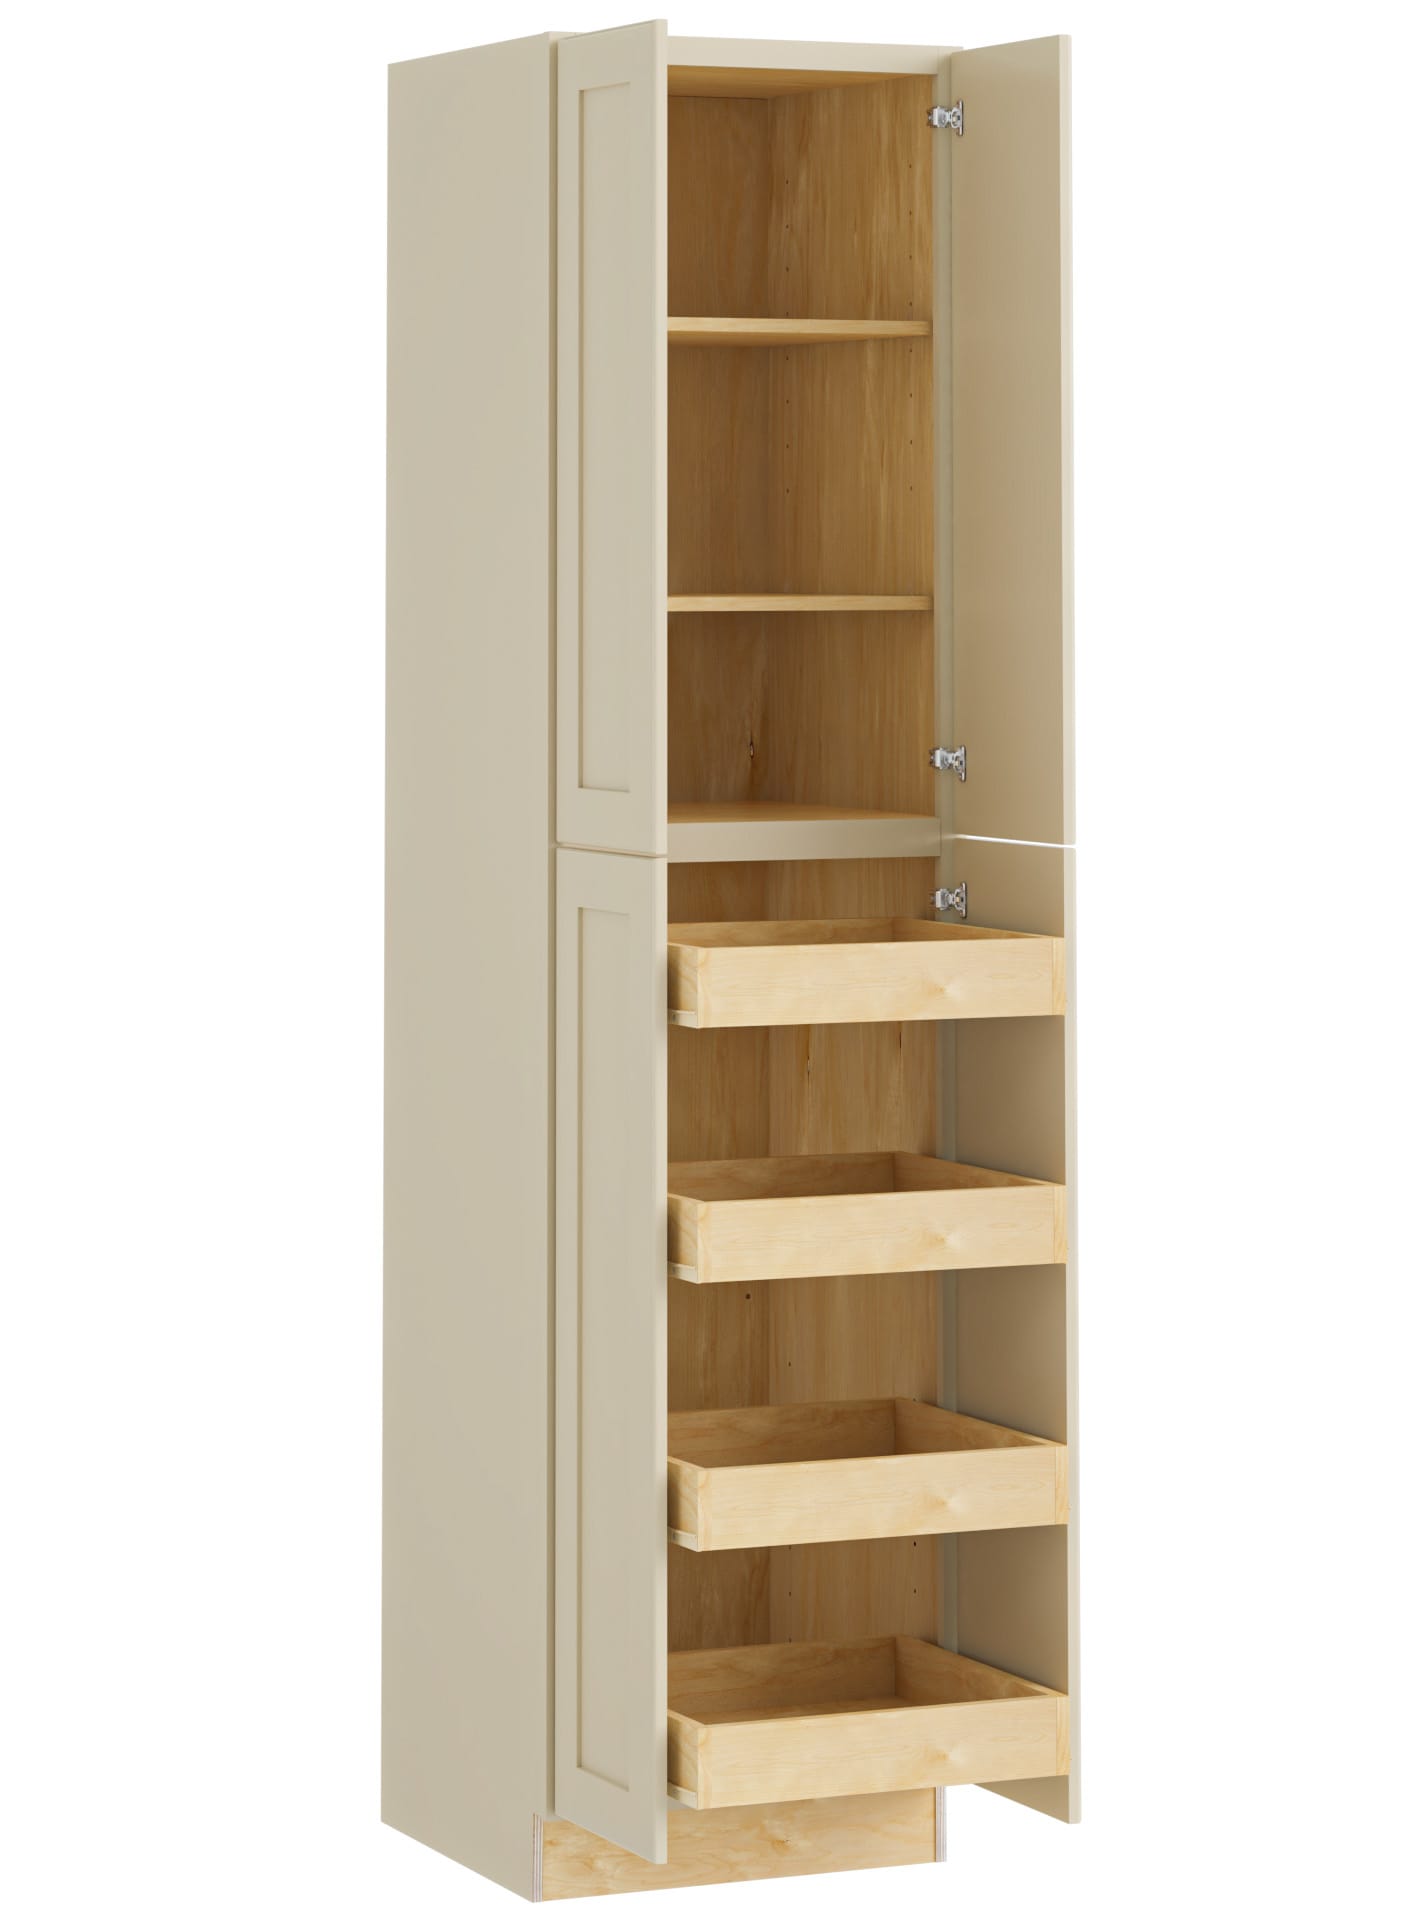 Luxxe Cabinetry 24-in W x 96-in H x 24-in D Norfolk Blended Cream Painted Door Pantry Fully Assembled Semi-custom Cabinet in Off-White